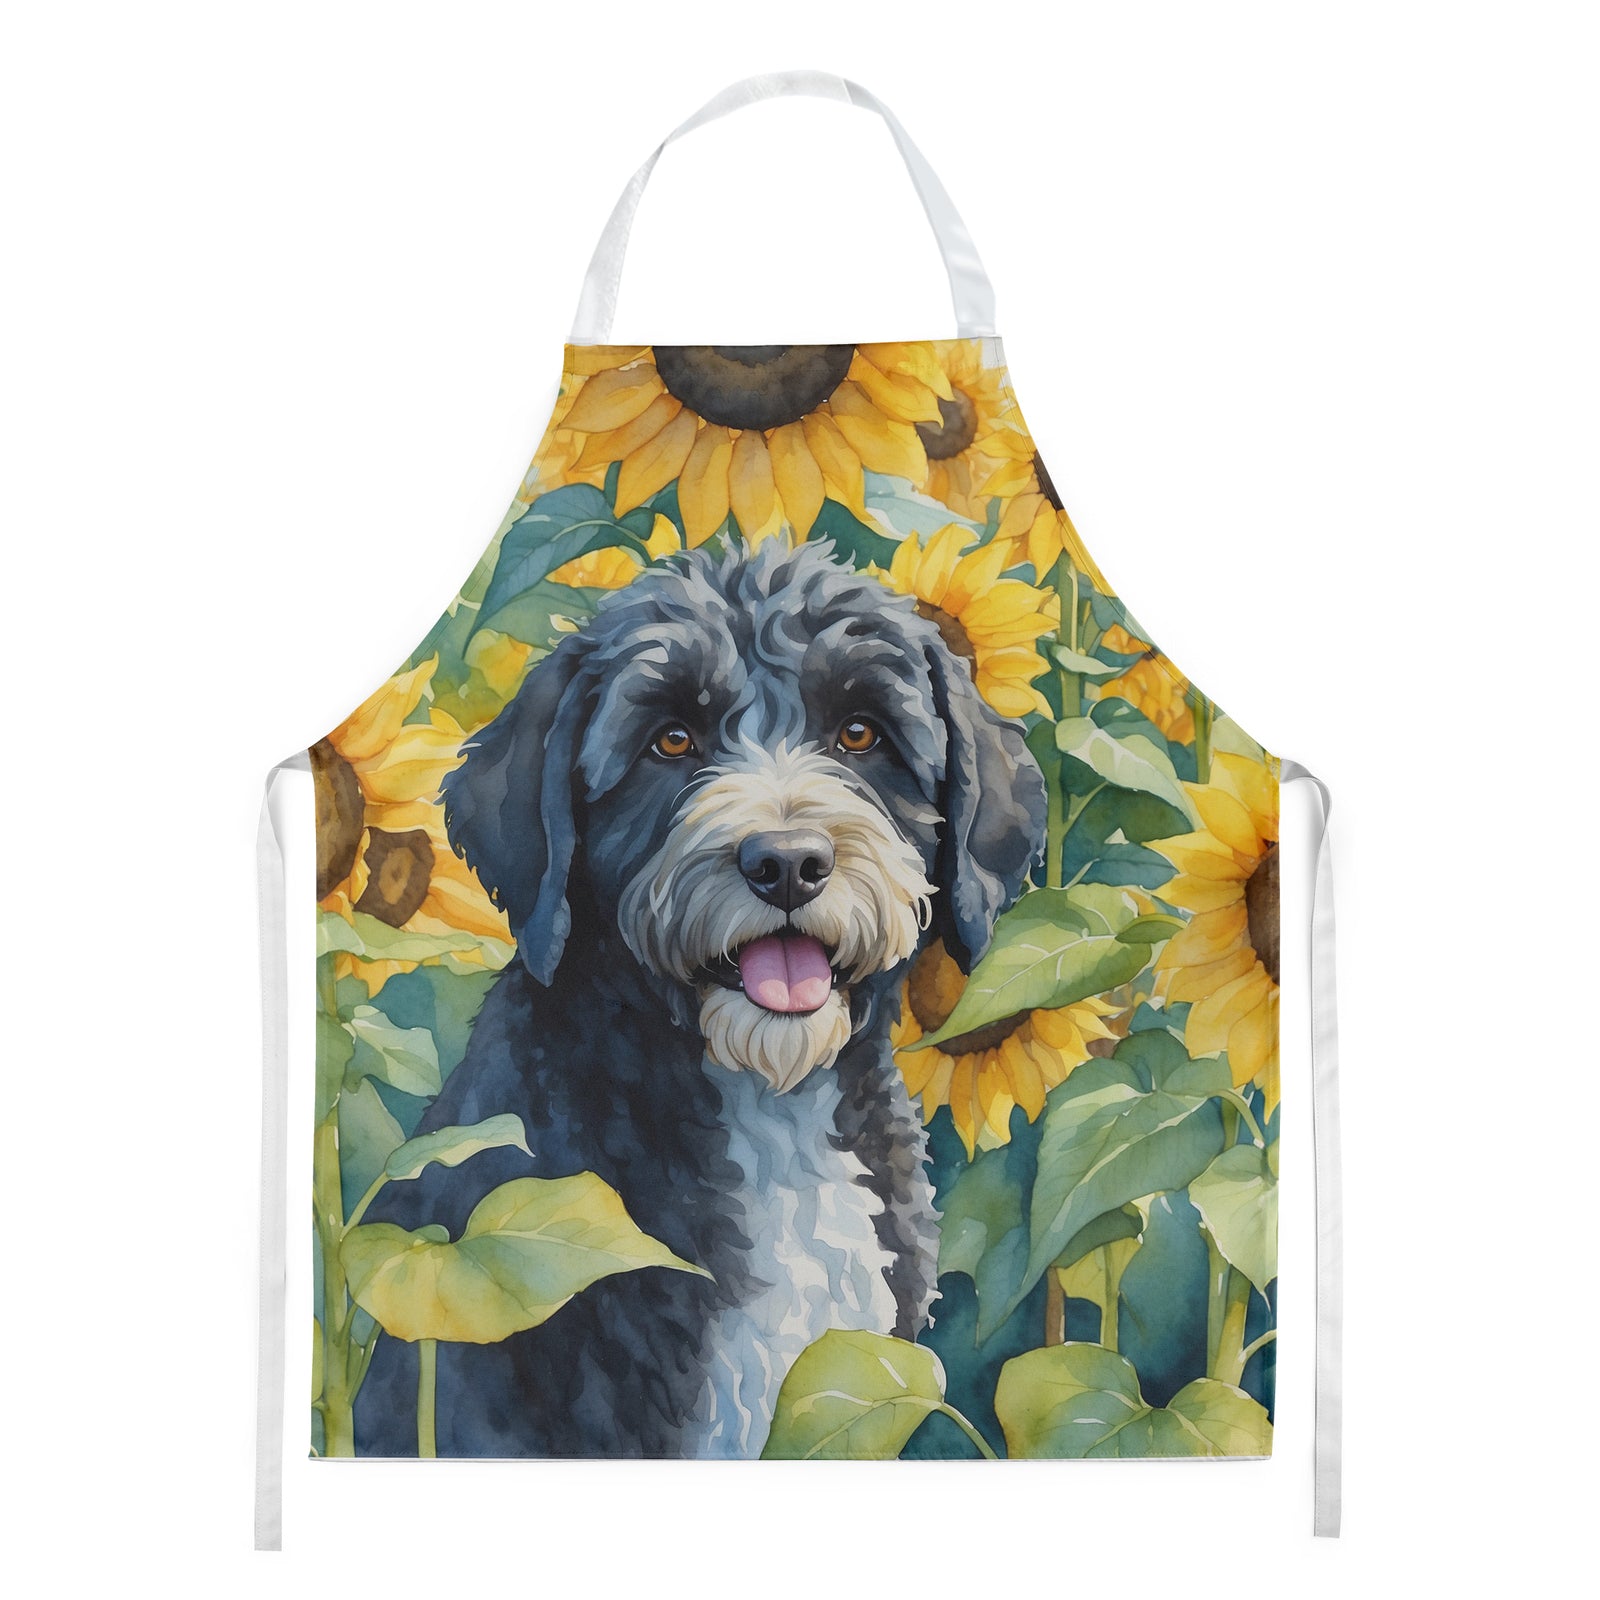 Buy this Portuguese Water Dog in Sunflowers Apron